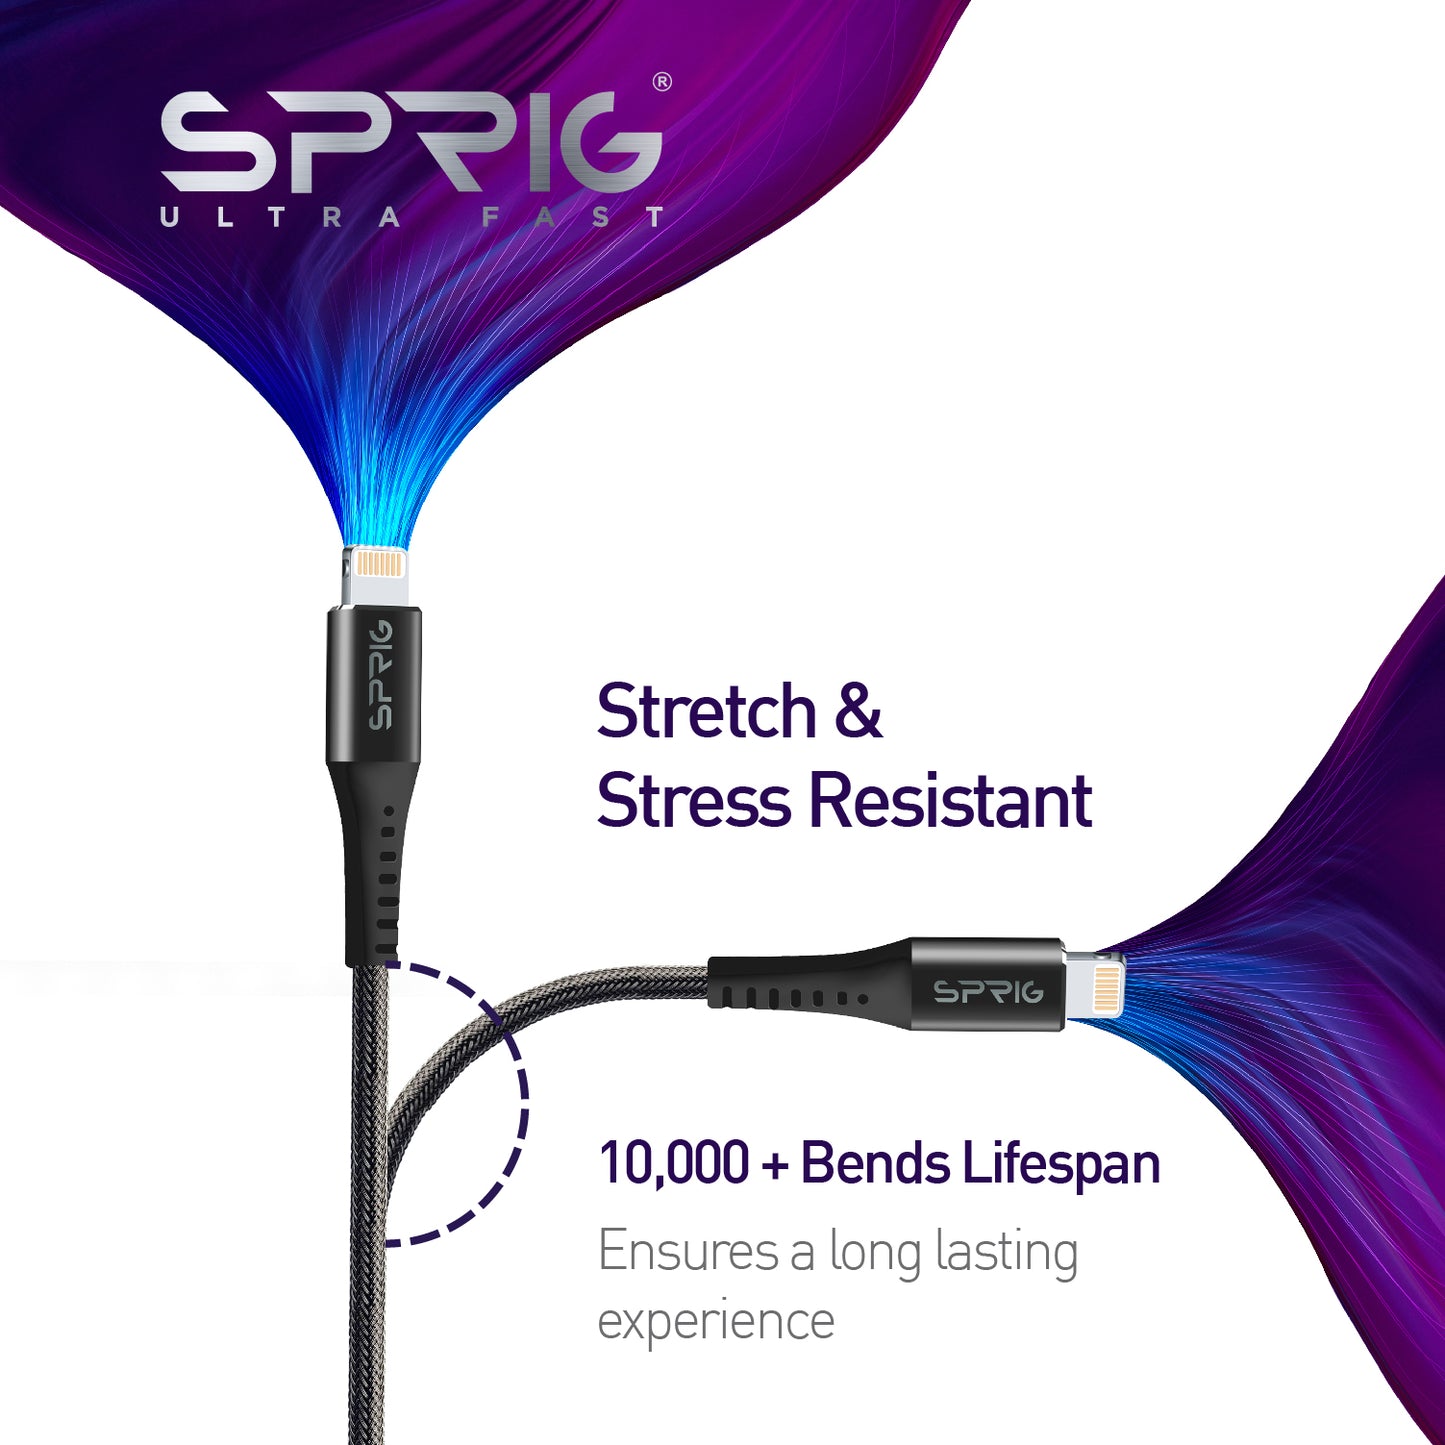 sprig ultra fast metal braided lightning charging / data sync cable for iphone (1m)